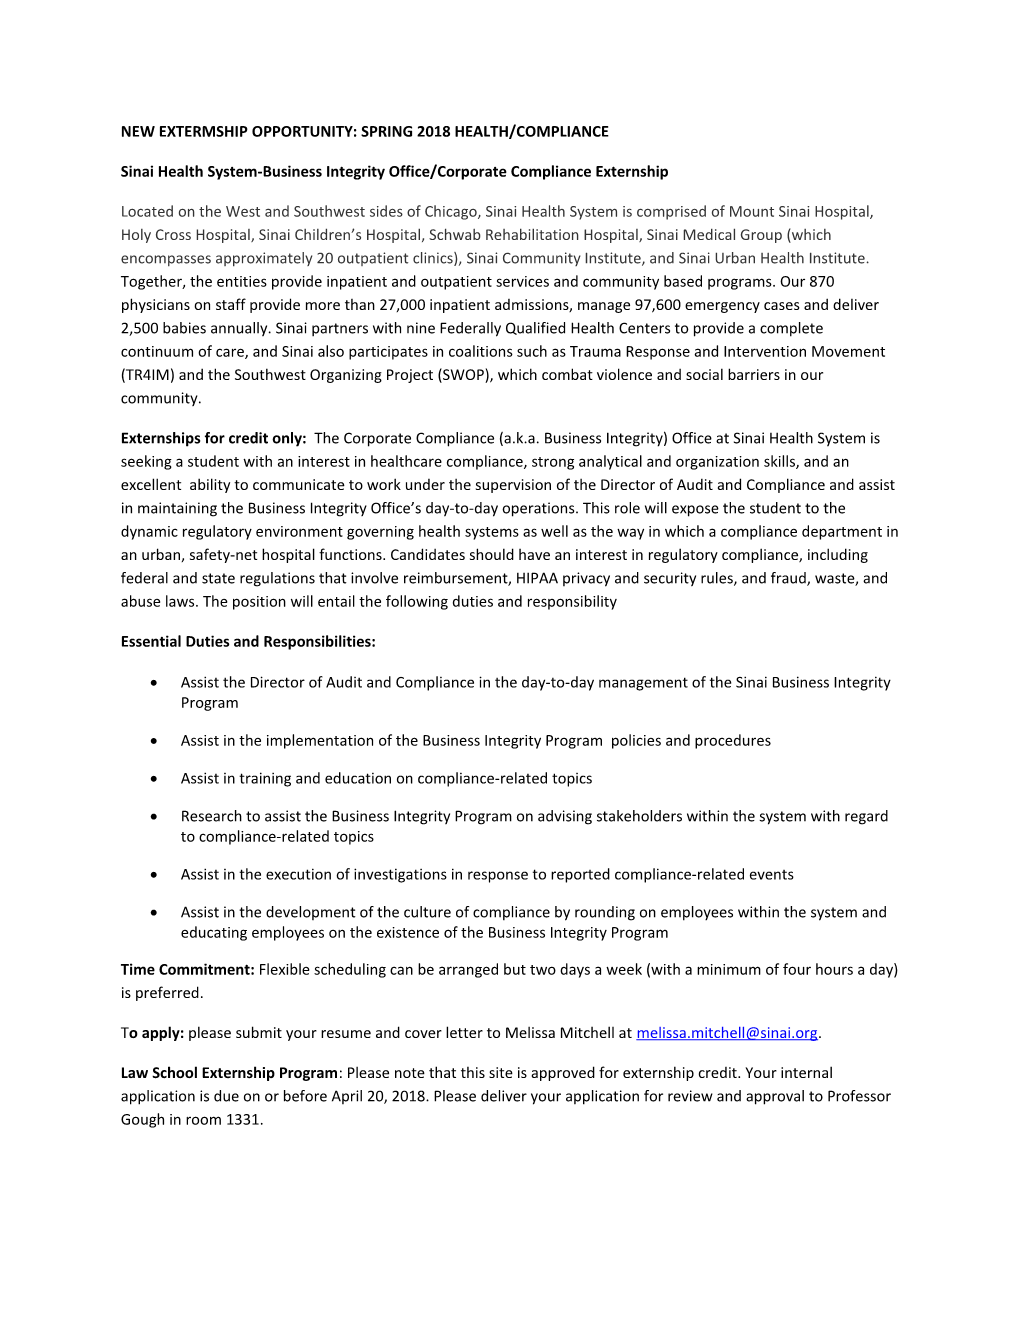 New Extermship Opportunity: Spring 2018Health/Compliance